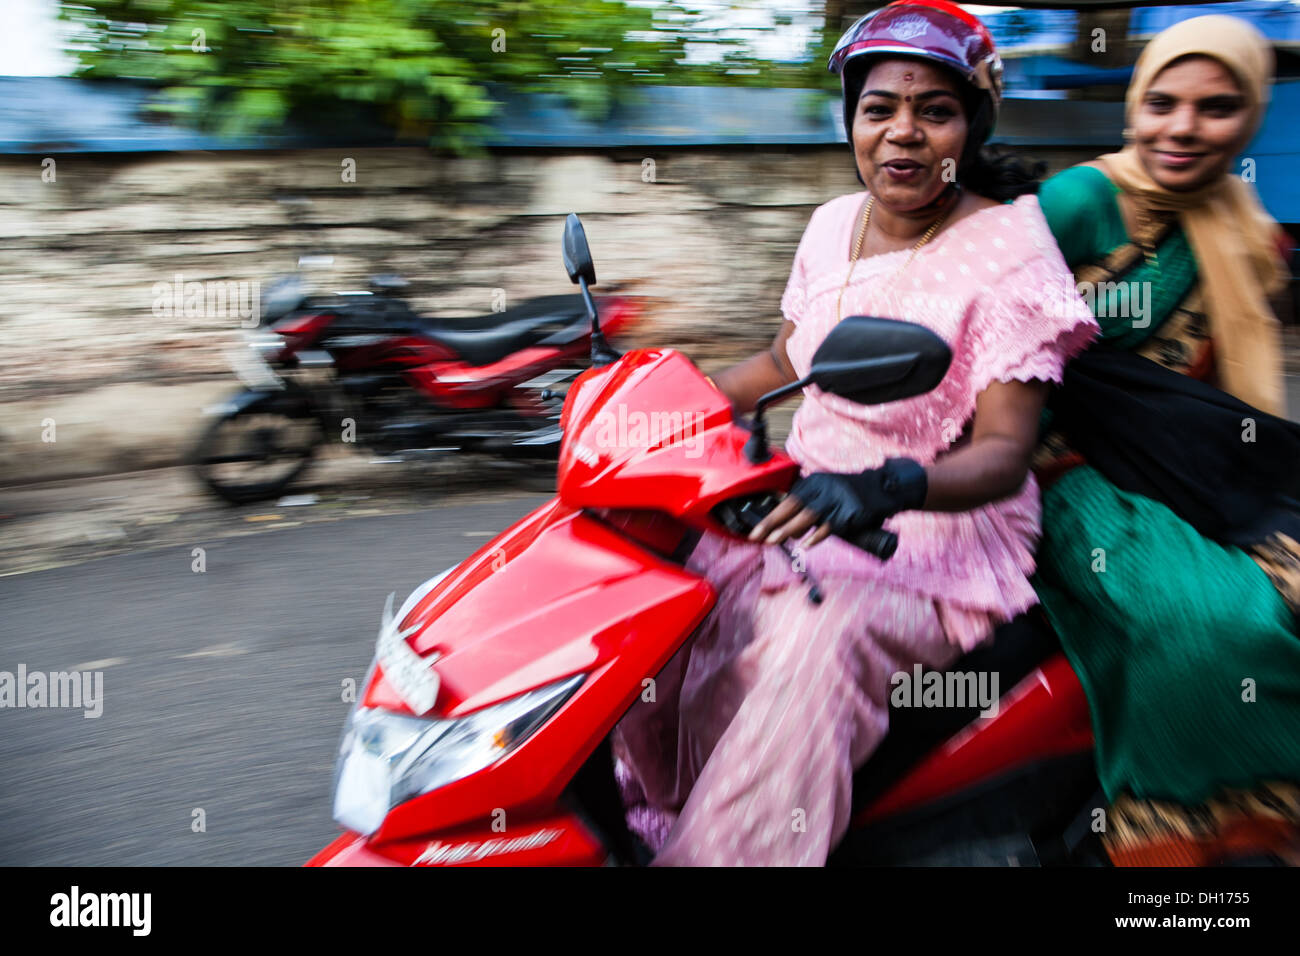 Panning image of local women on a moped, Cochin, India Stock Photo